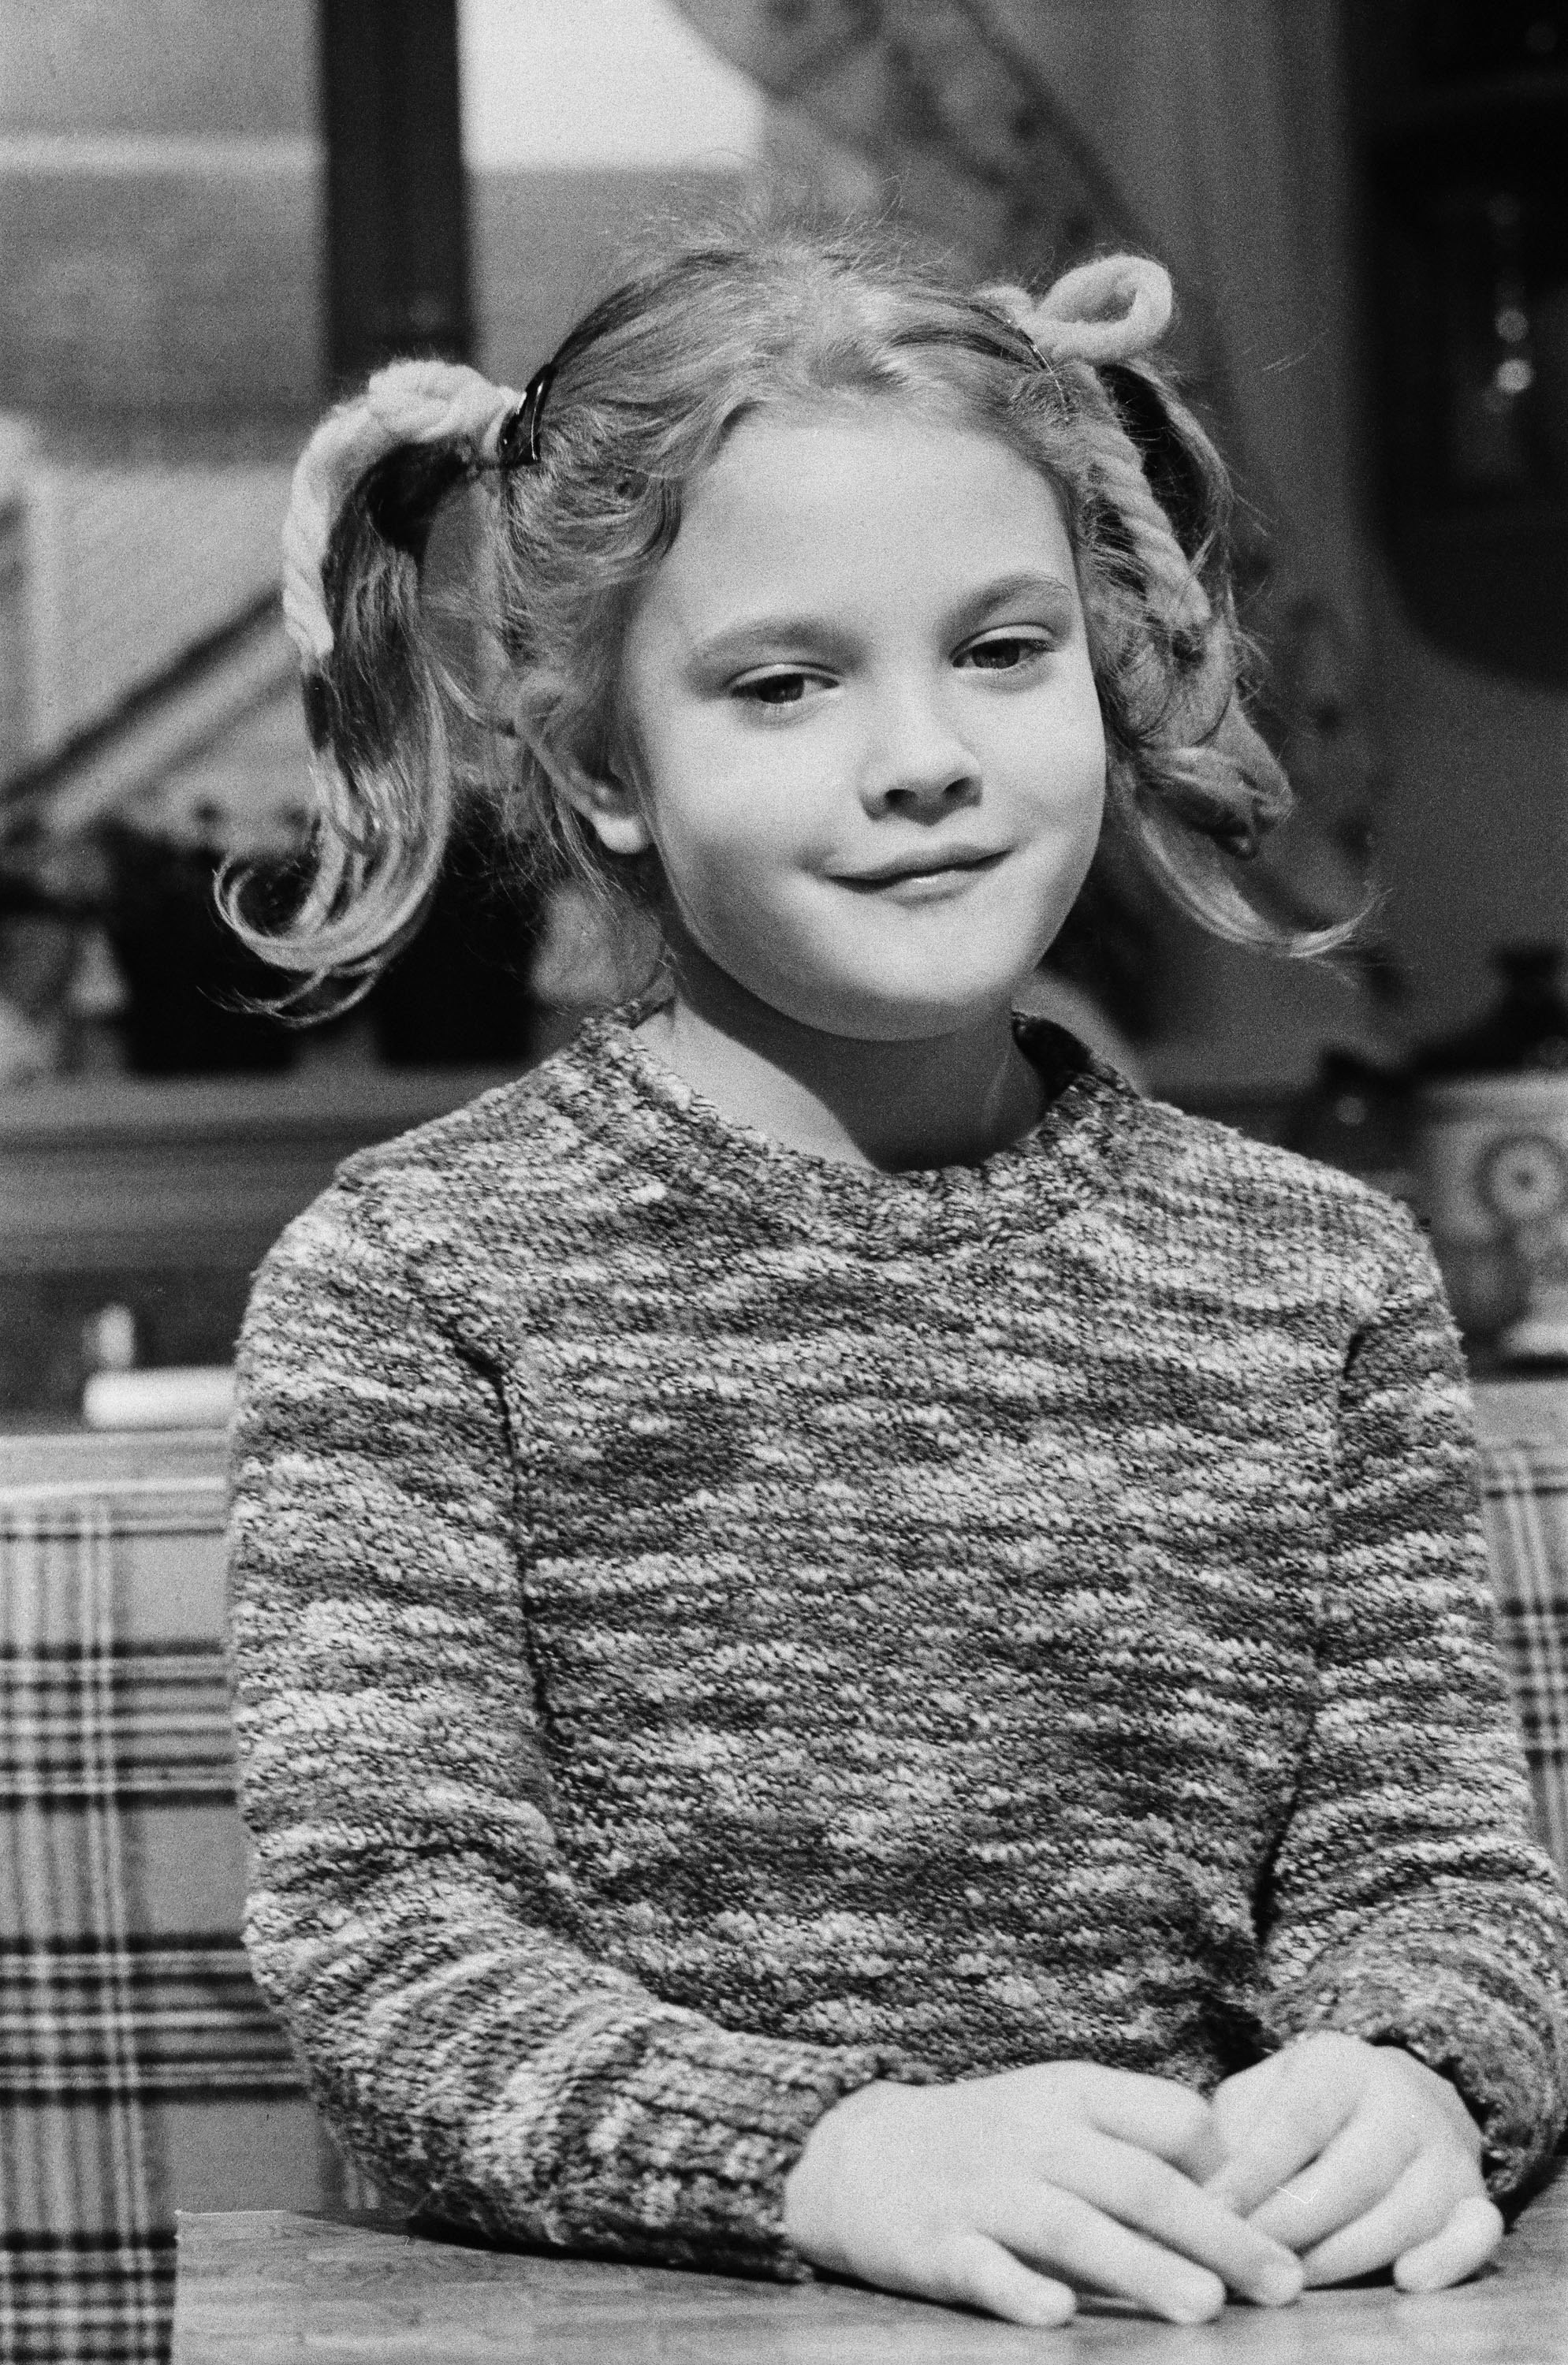 A black and white photo of Drew as a kid, her hair in pigtails